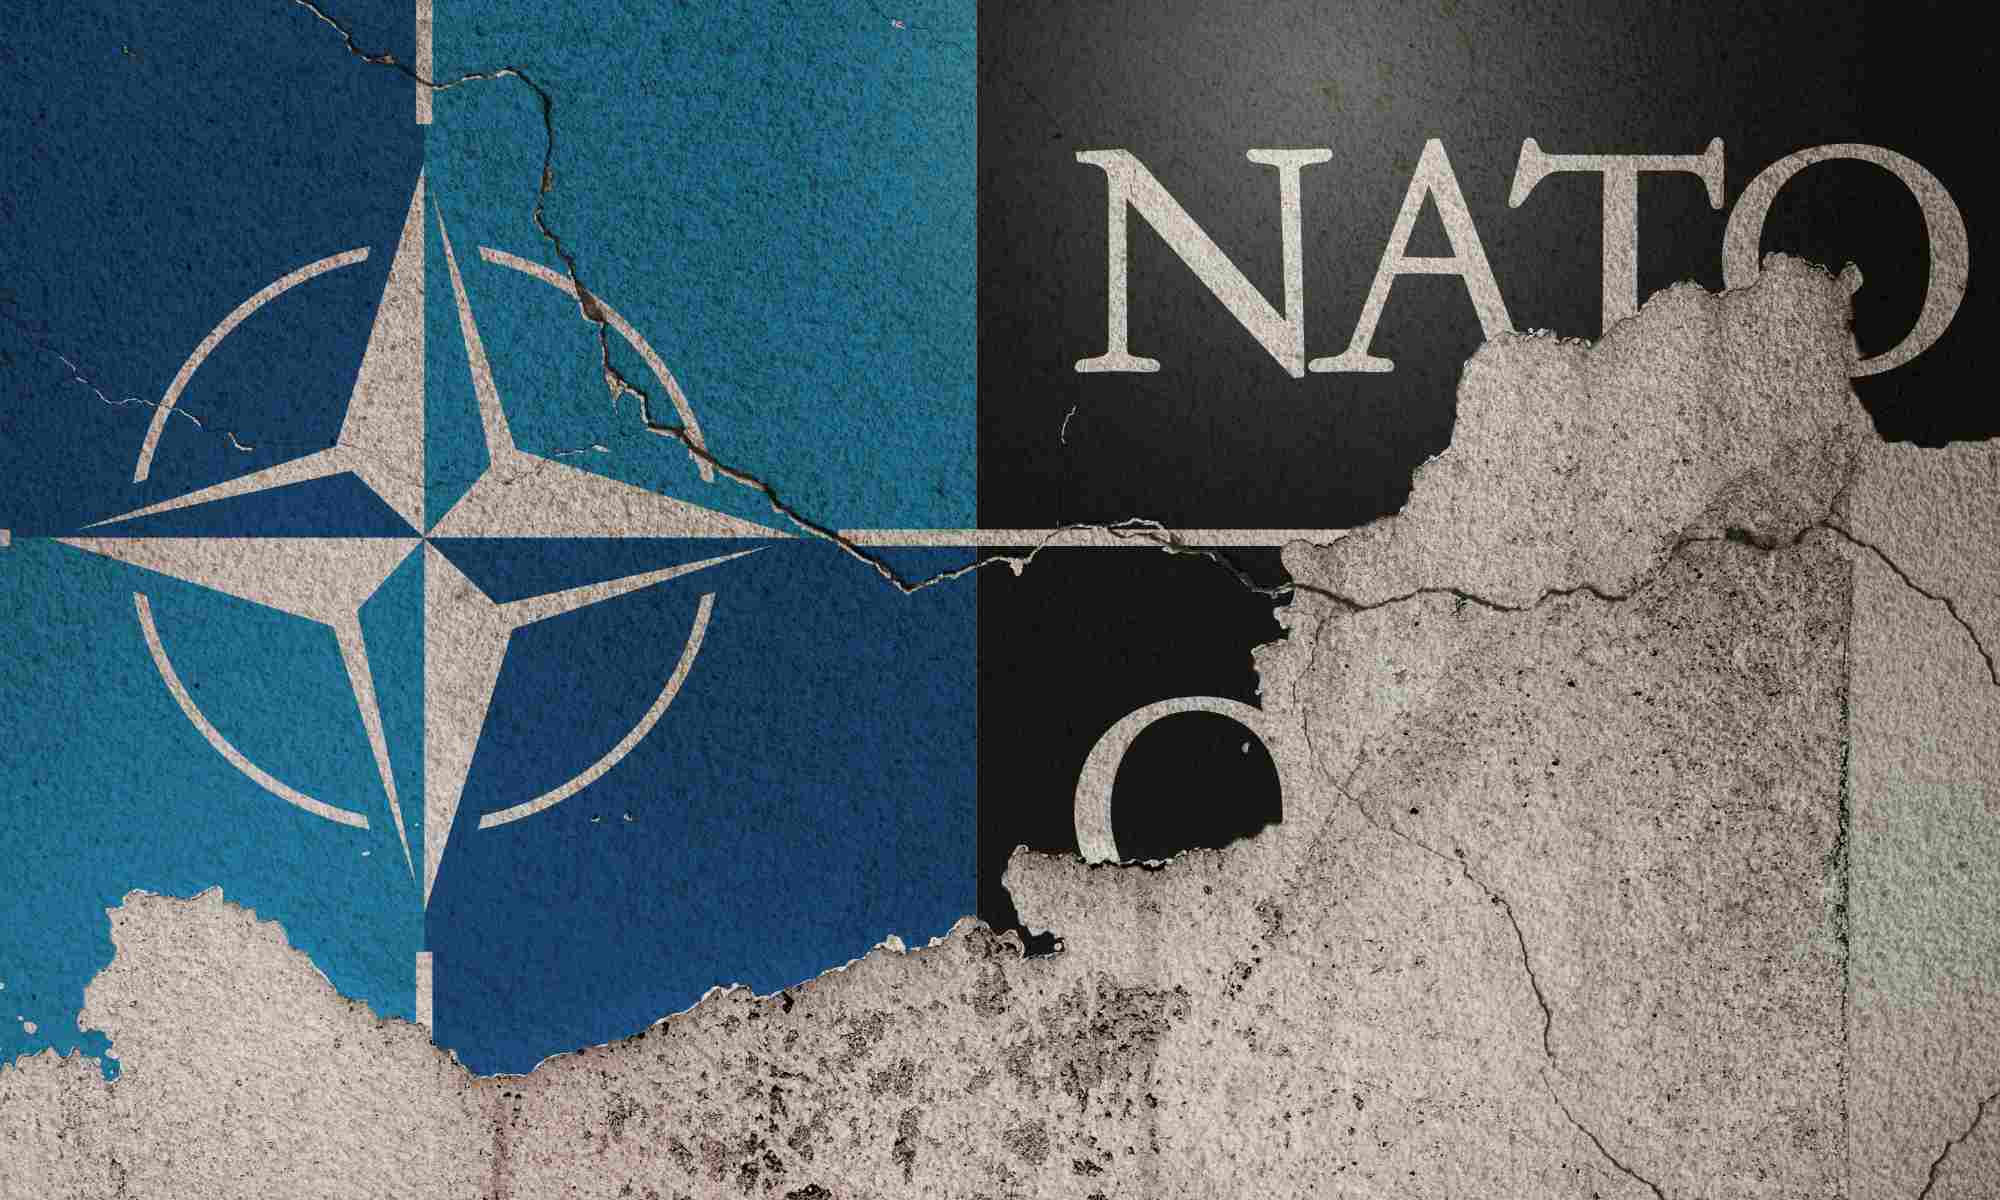 Illustration of the design of the NATO logo and acronym on cracked and distressed concrete. 